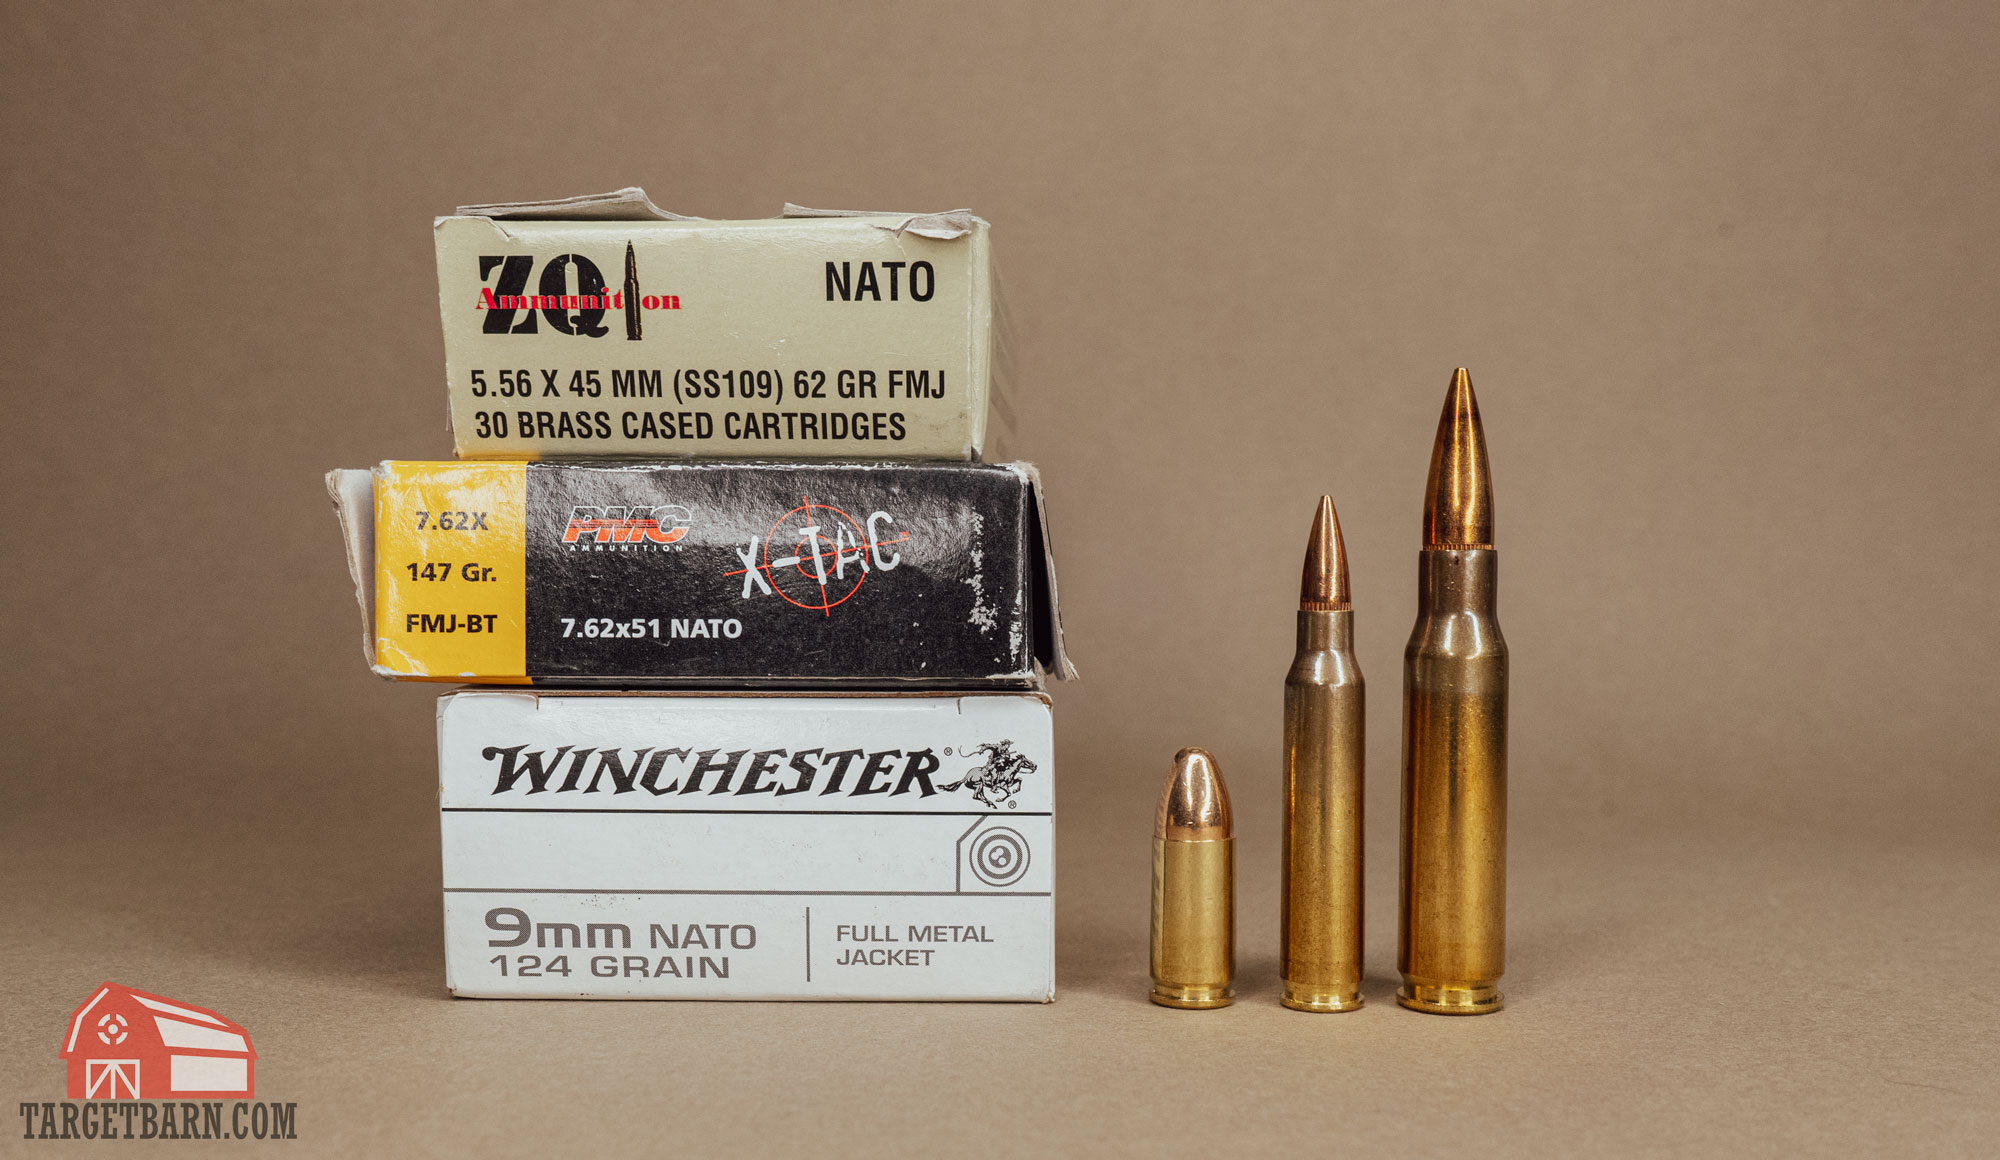 three boxes of nato ammo, including 5.56, 9mm, and 7.62 next to three rounds of nato ammo